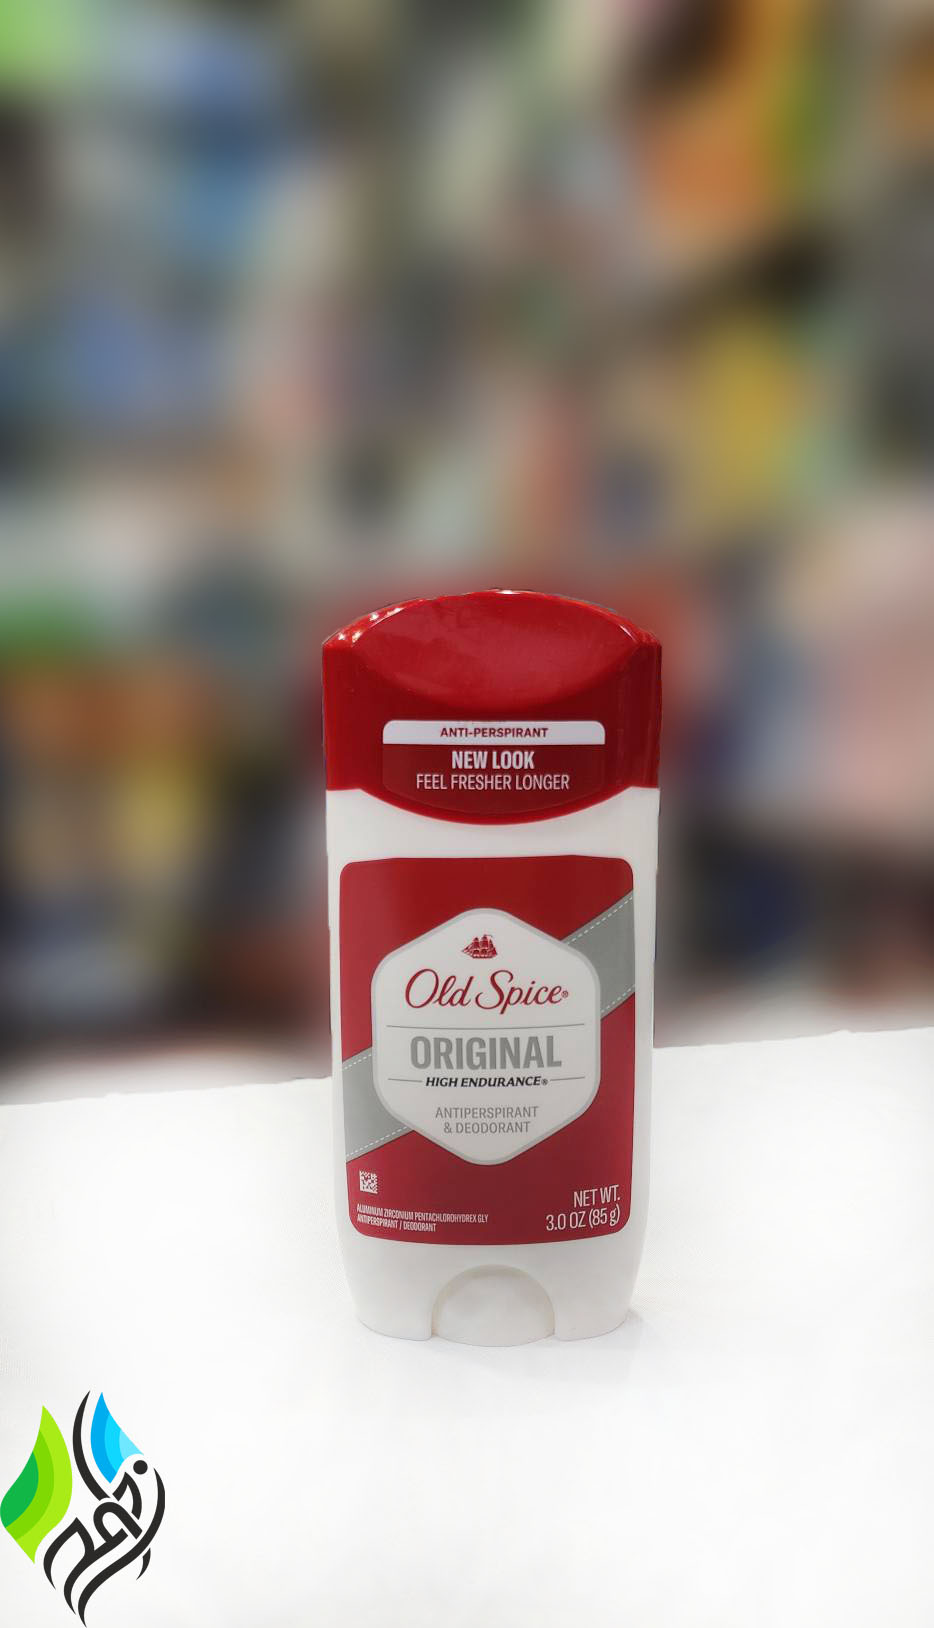 Old Spice antiperspirant and deodorant, Old Spice soap lotion, original model